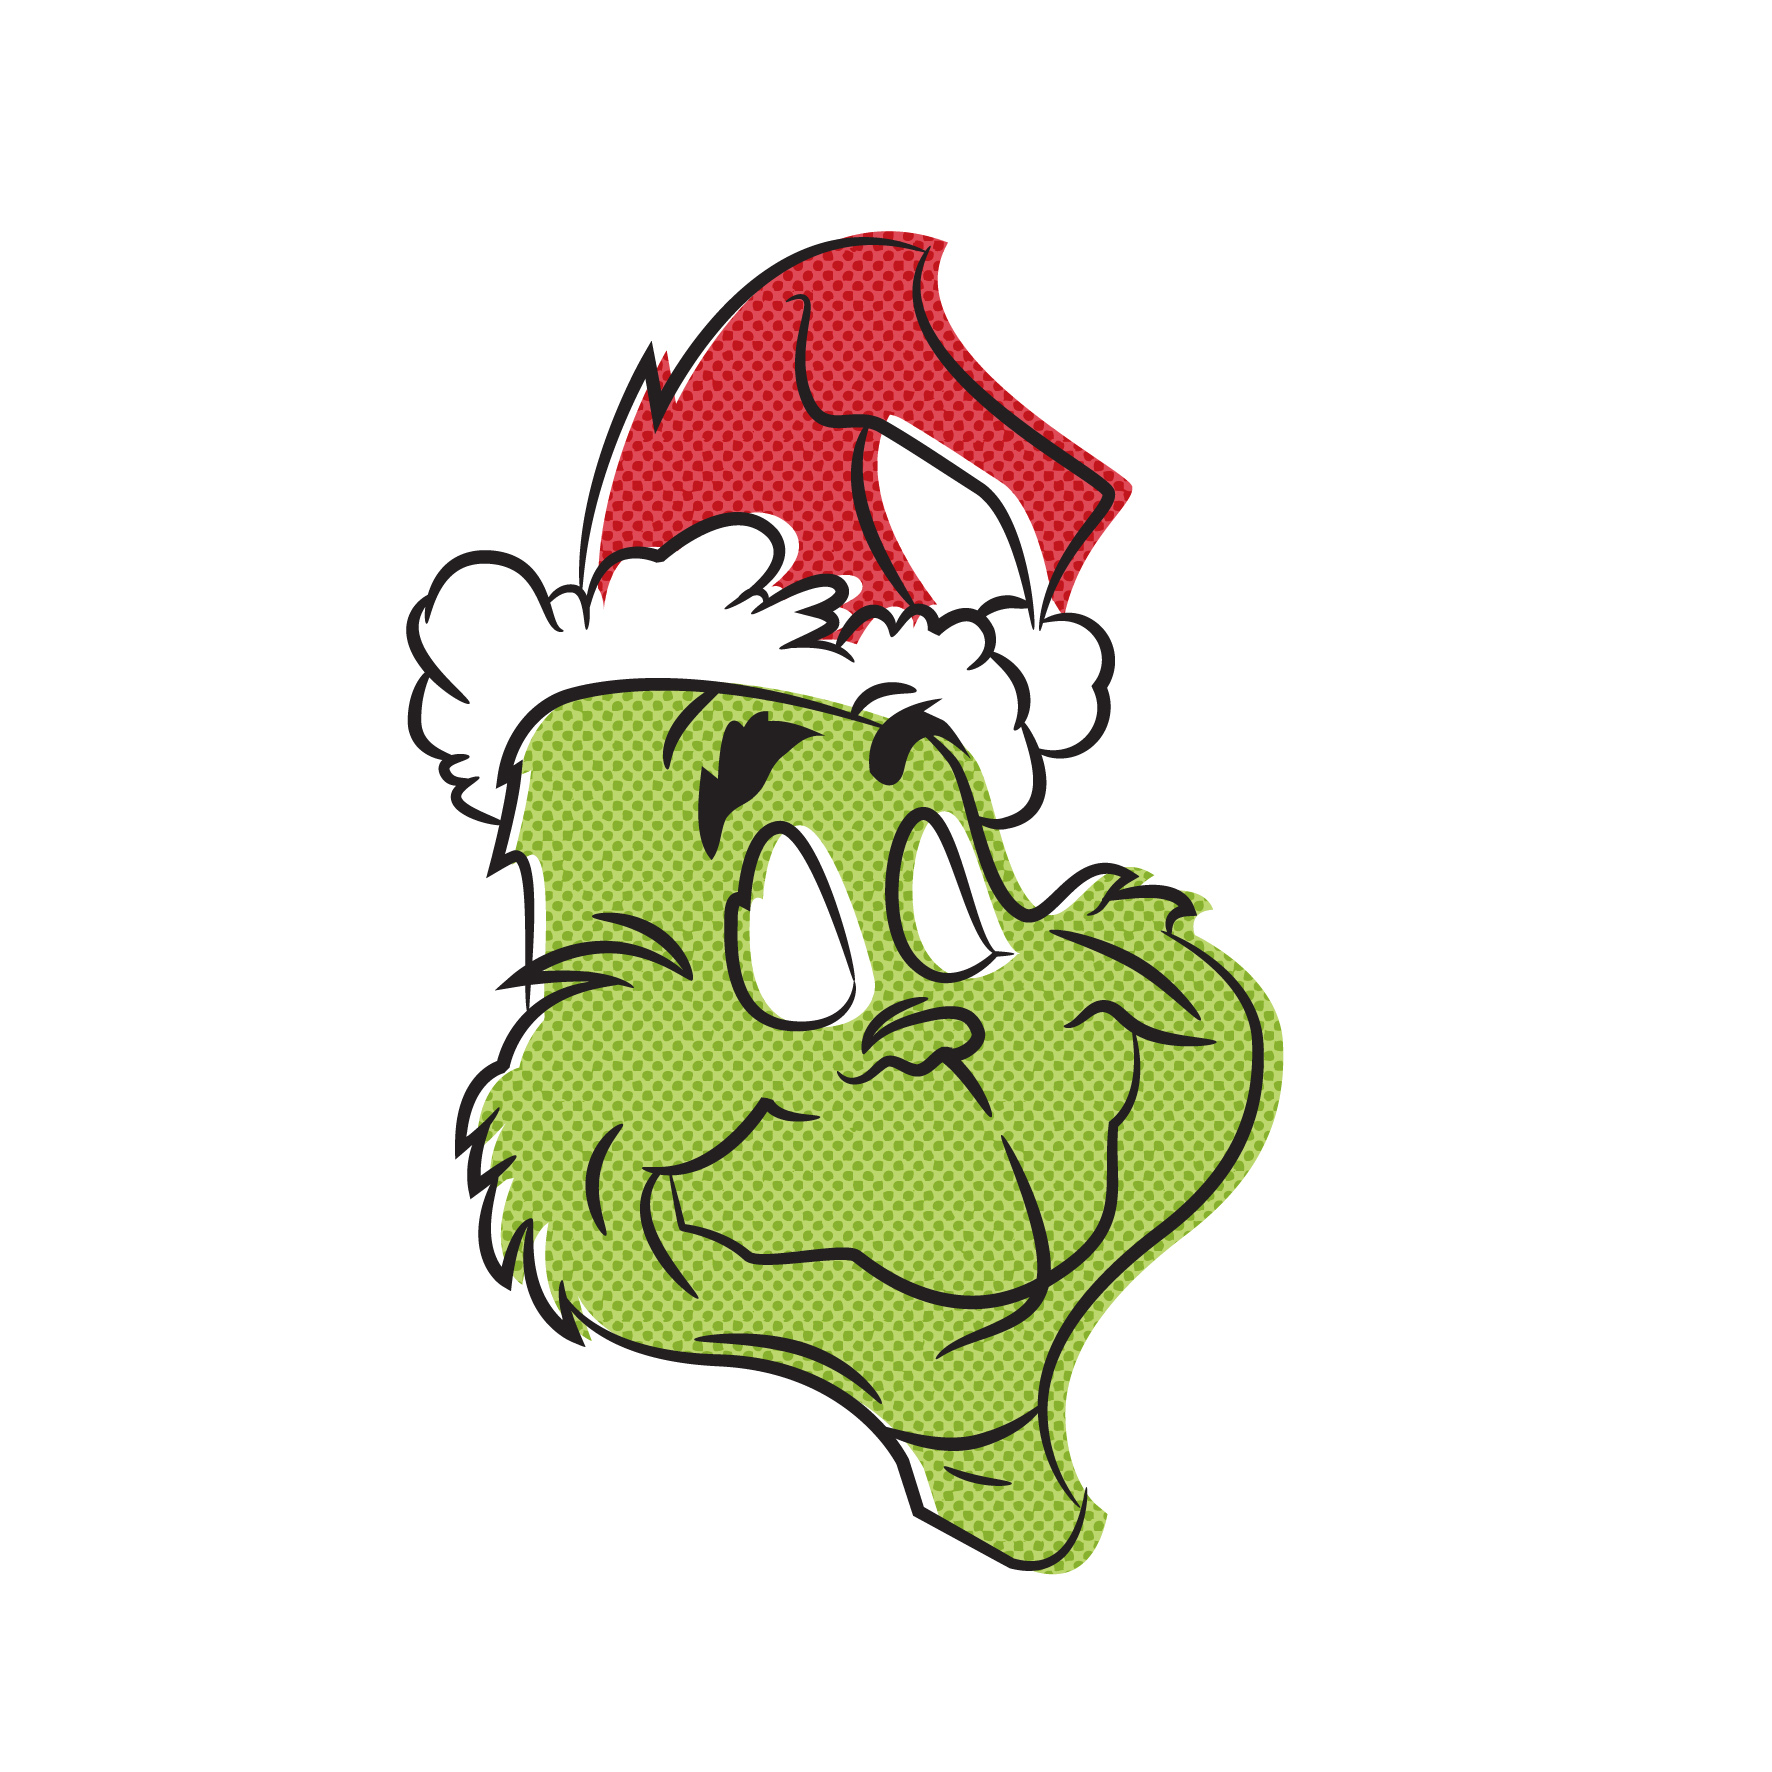 Christmas Eve - The Grinch - Process.